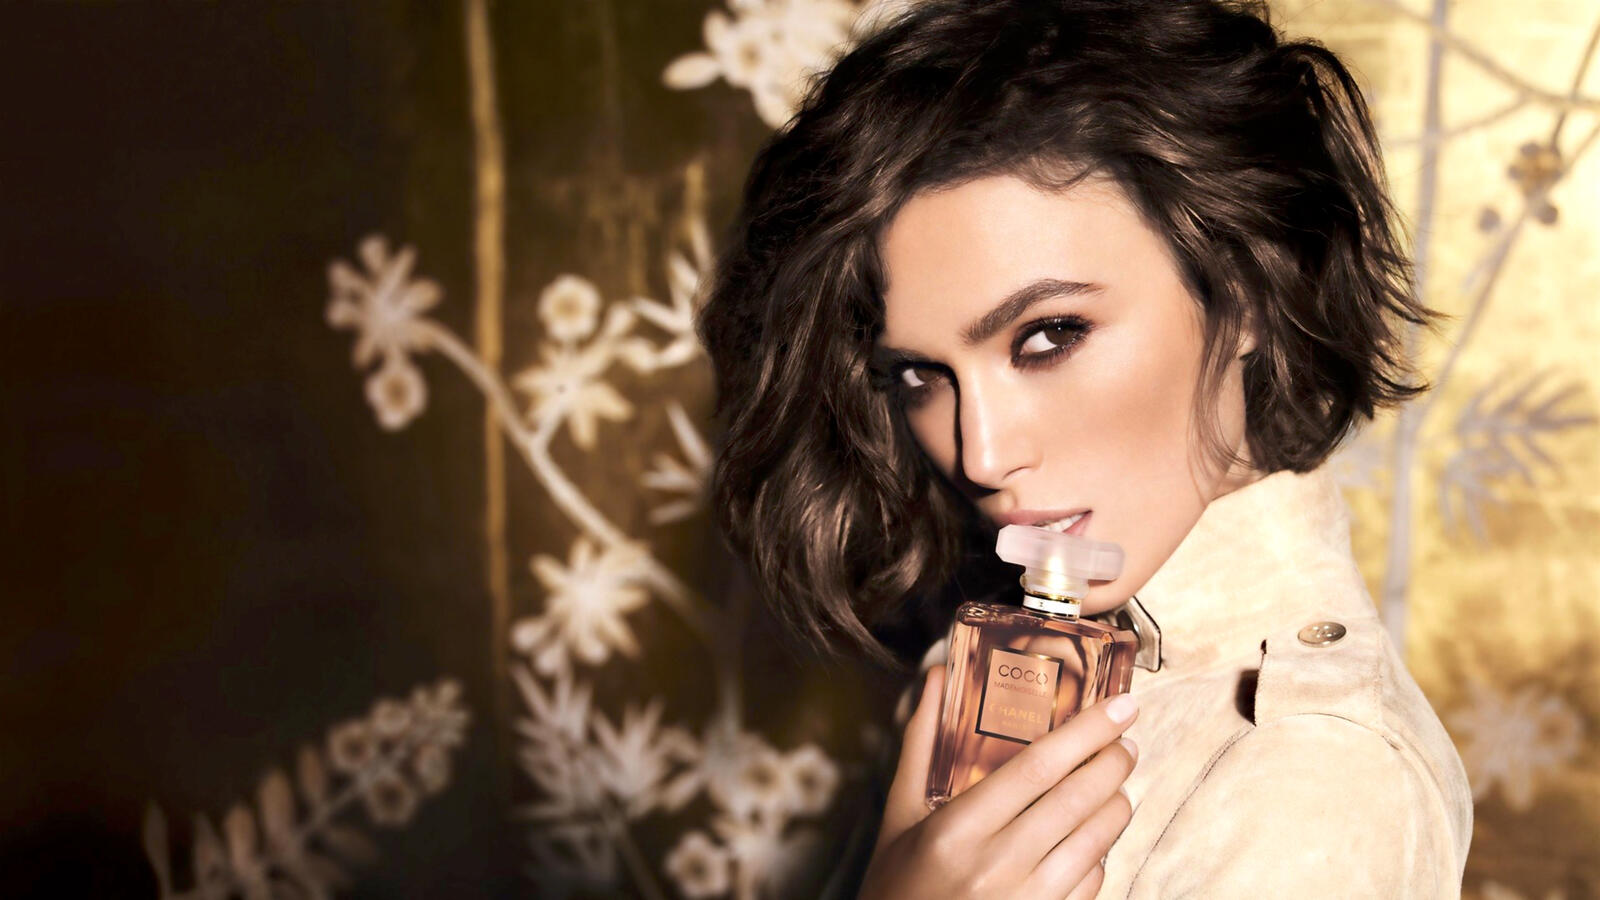 Wallpapers keira knightley model actress on the desktop